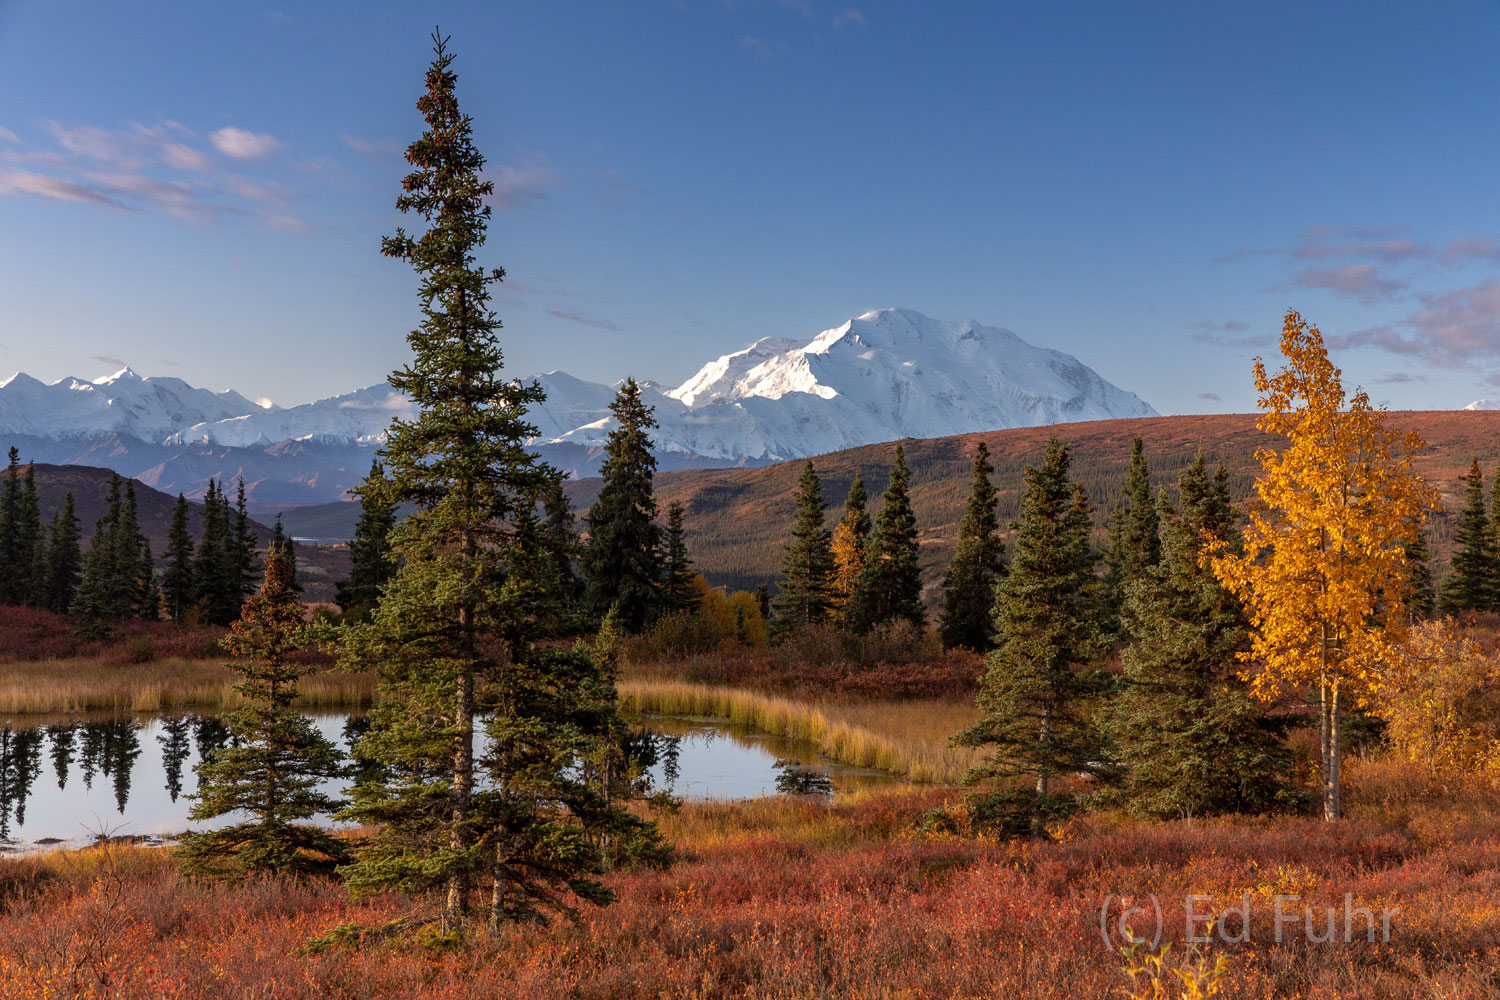 Golden leaves, red berry bushes, blue skies and a clear view of Mount Denali greet me at sunrise by Camp Denali.